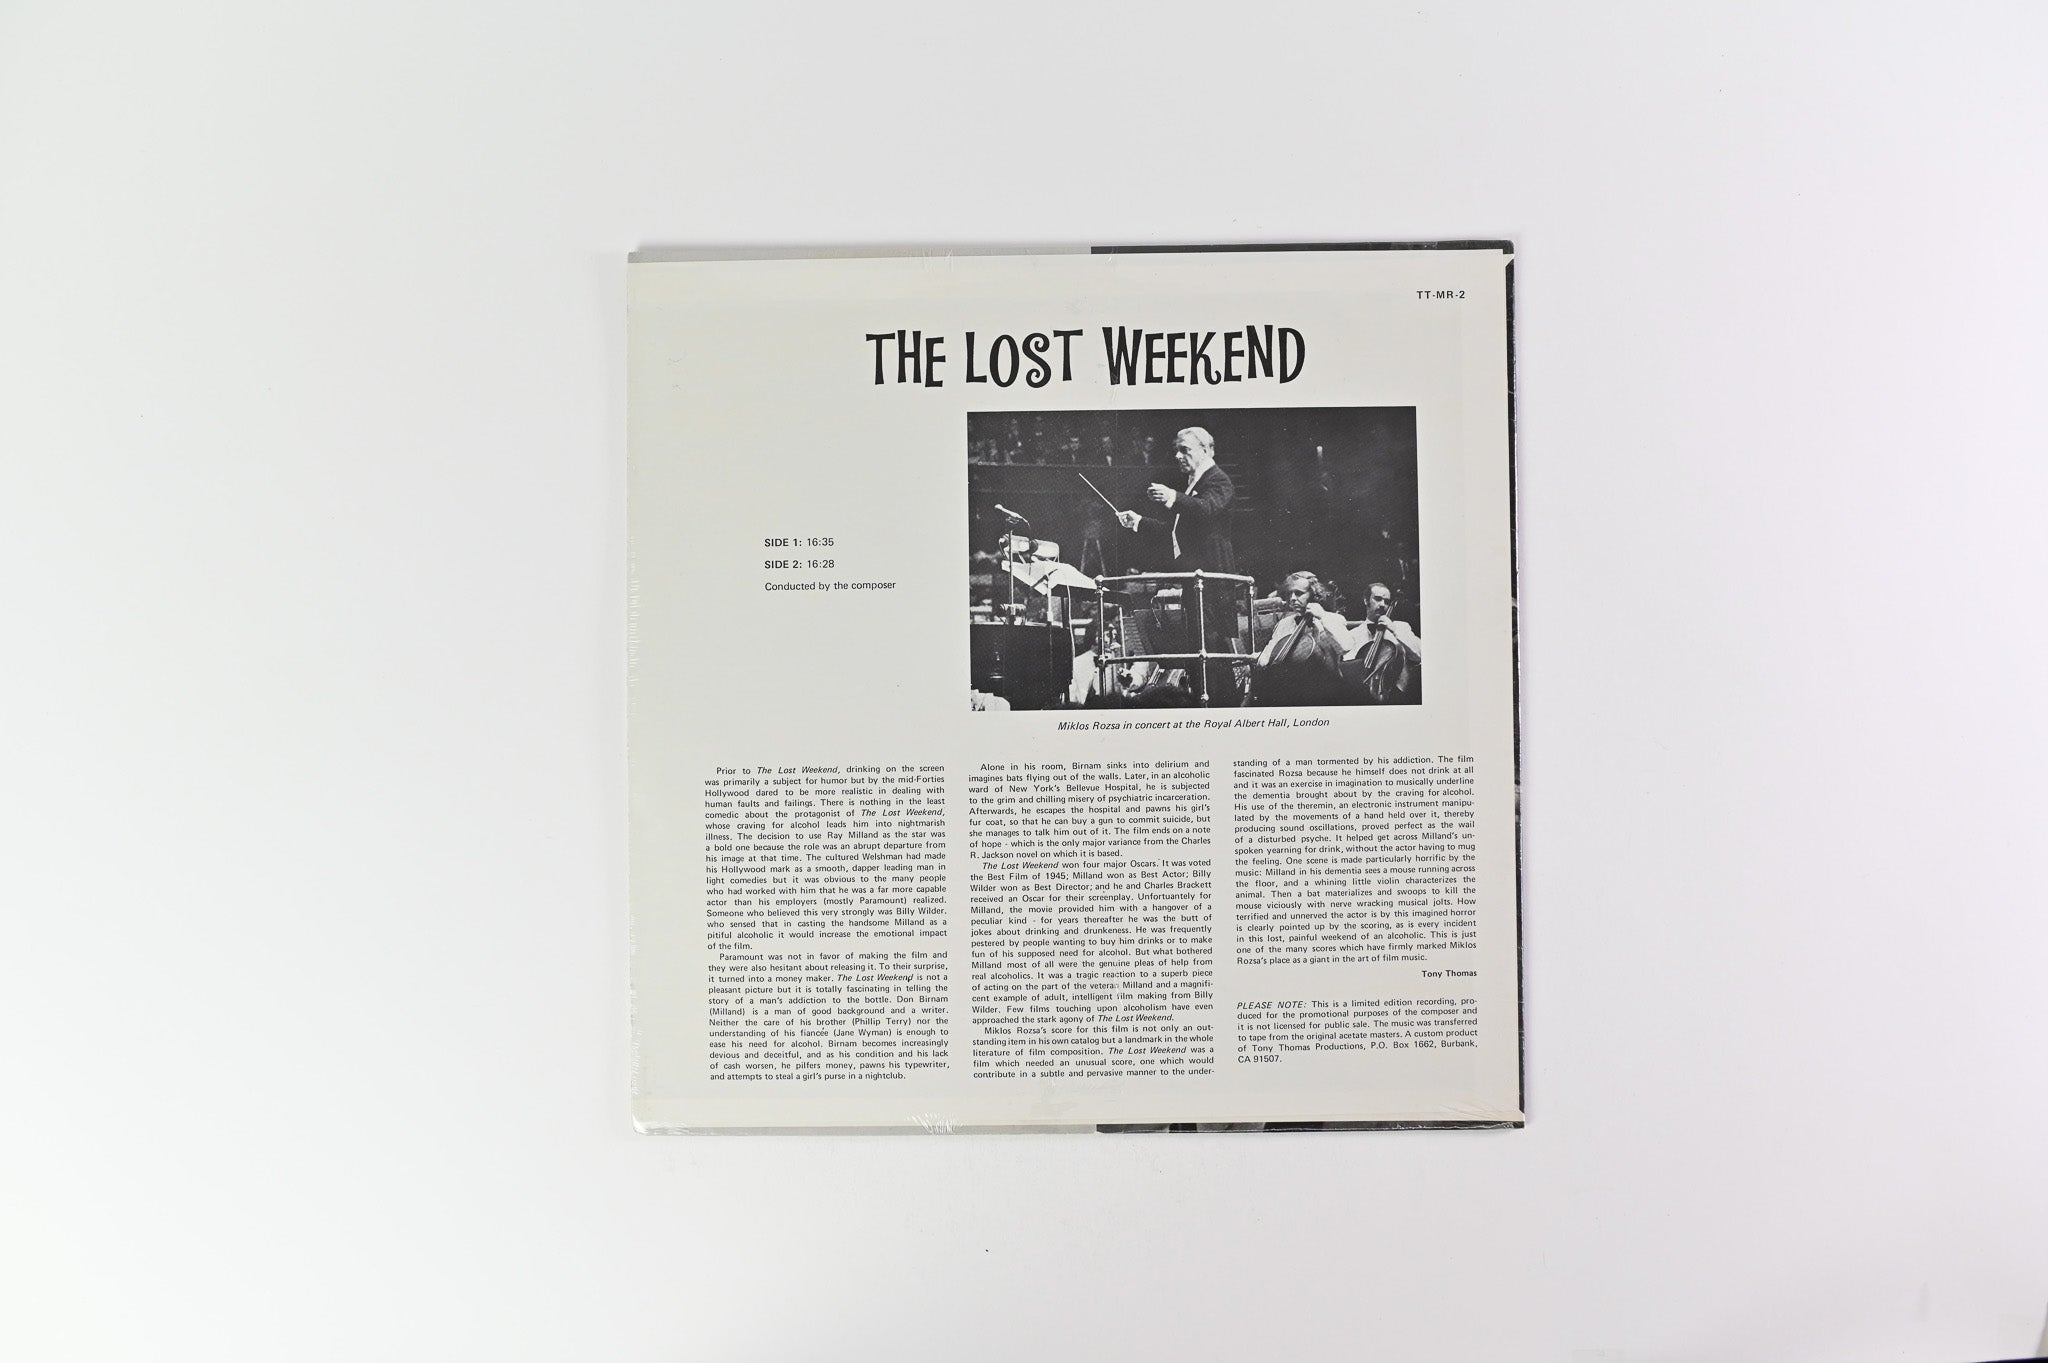 Miklós Rózsa - The Lost Weekend (The Classic Film Score) on Tony Thomas Productions Sealed